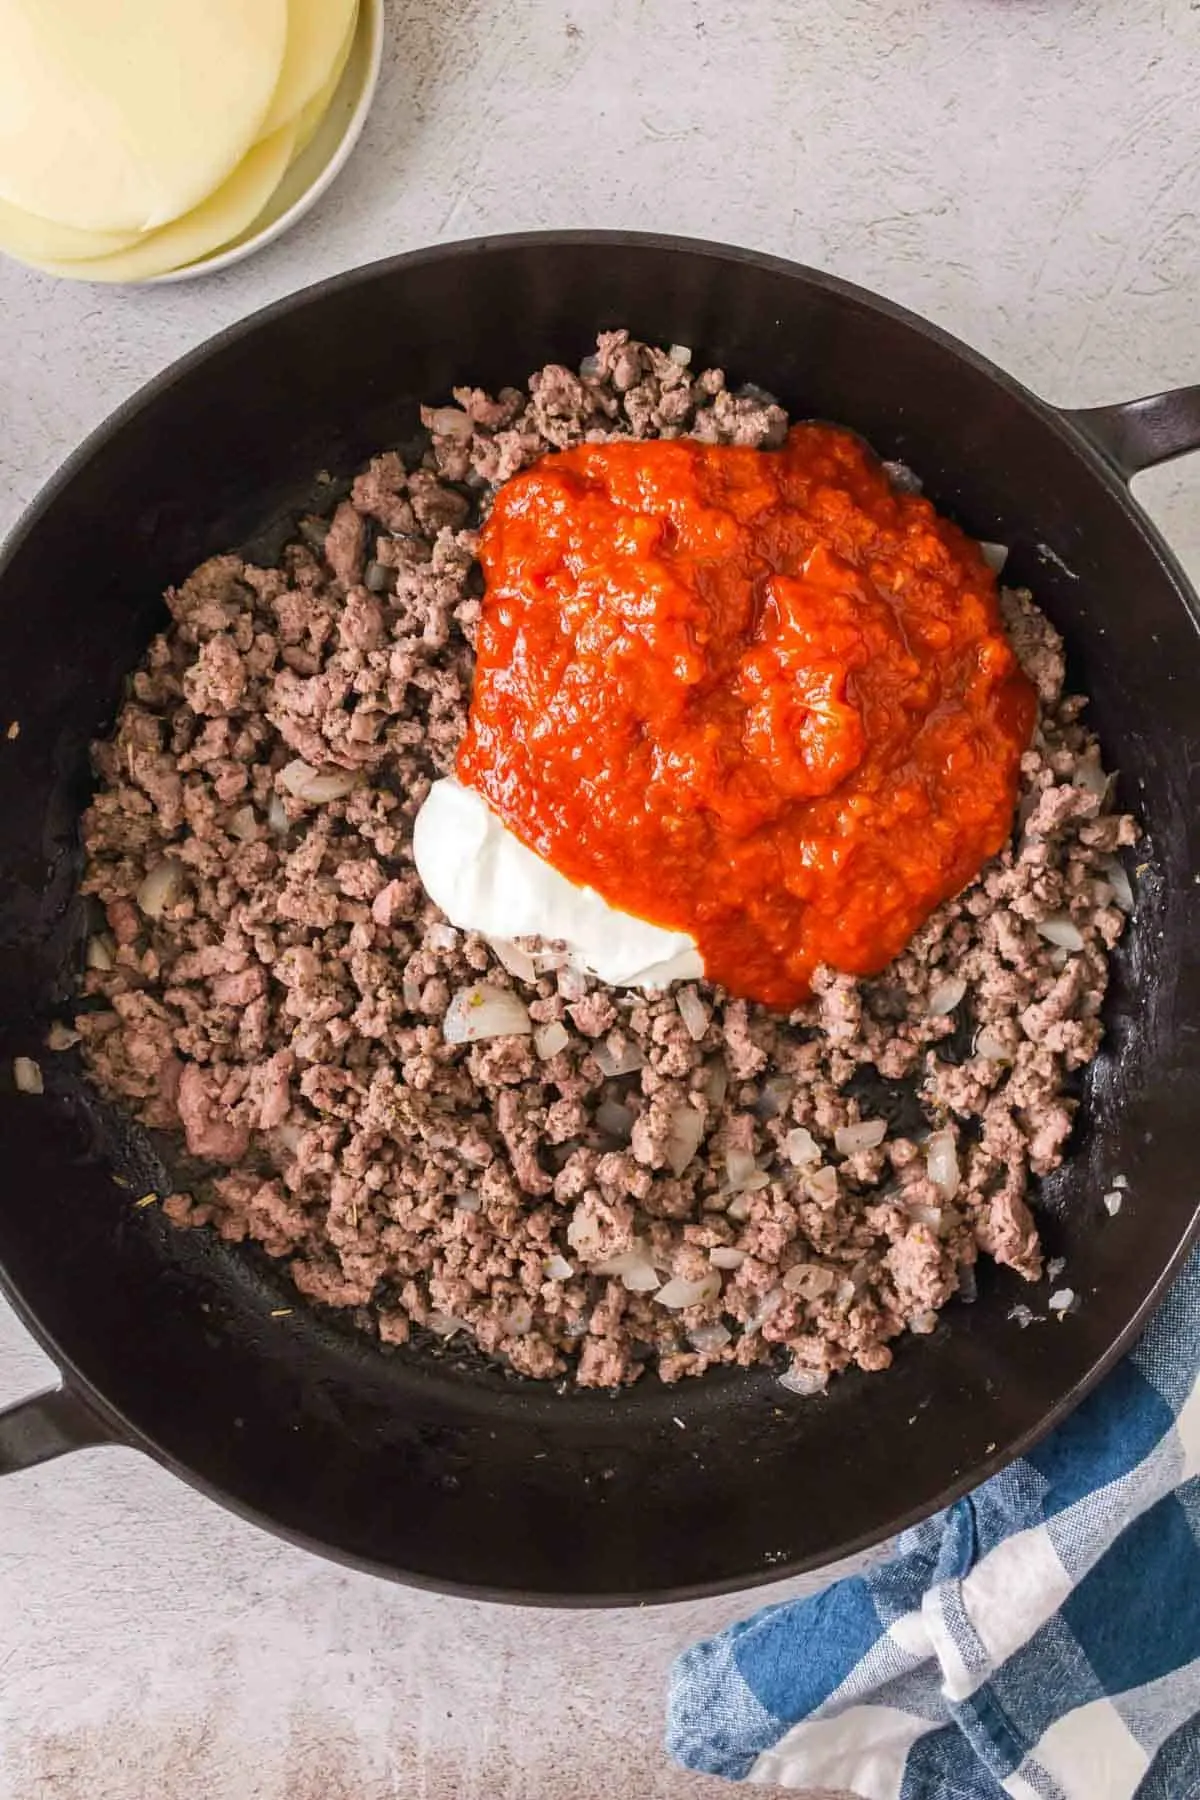 marinara sauce and sour cream on top of cooked ground beef in a skillet